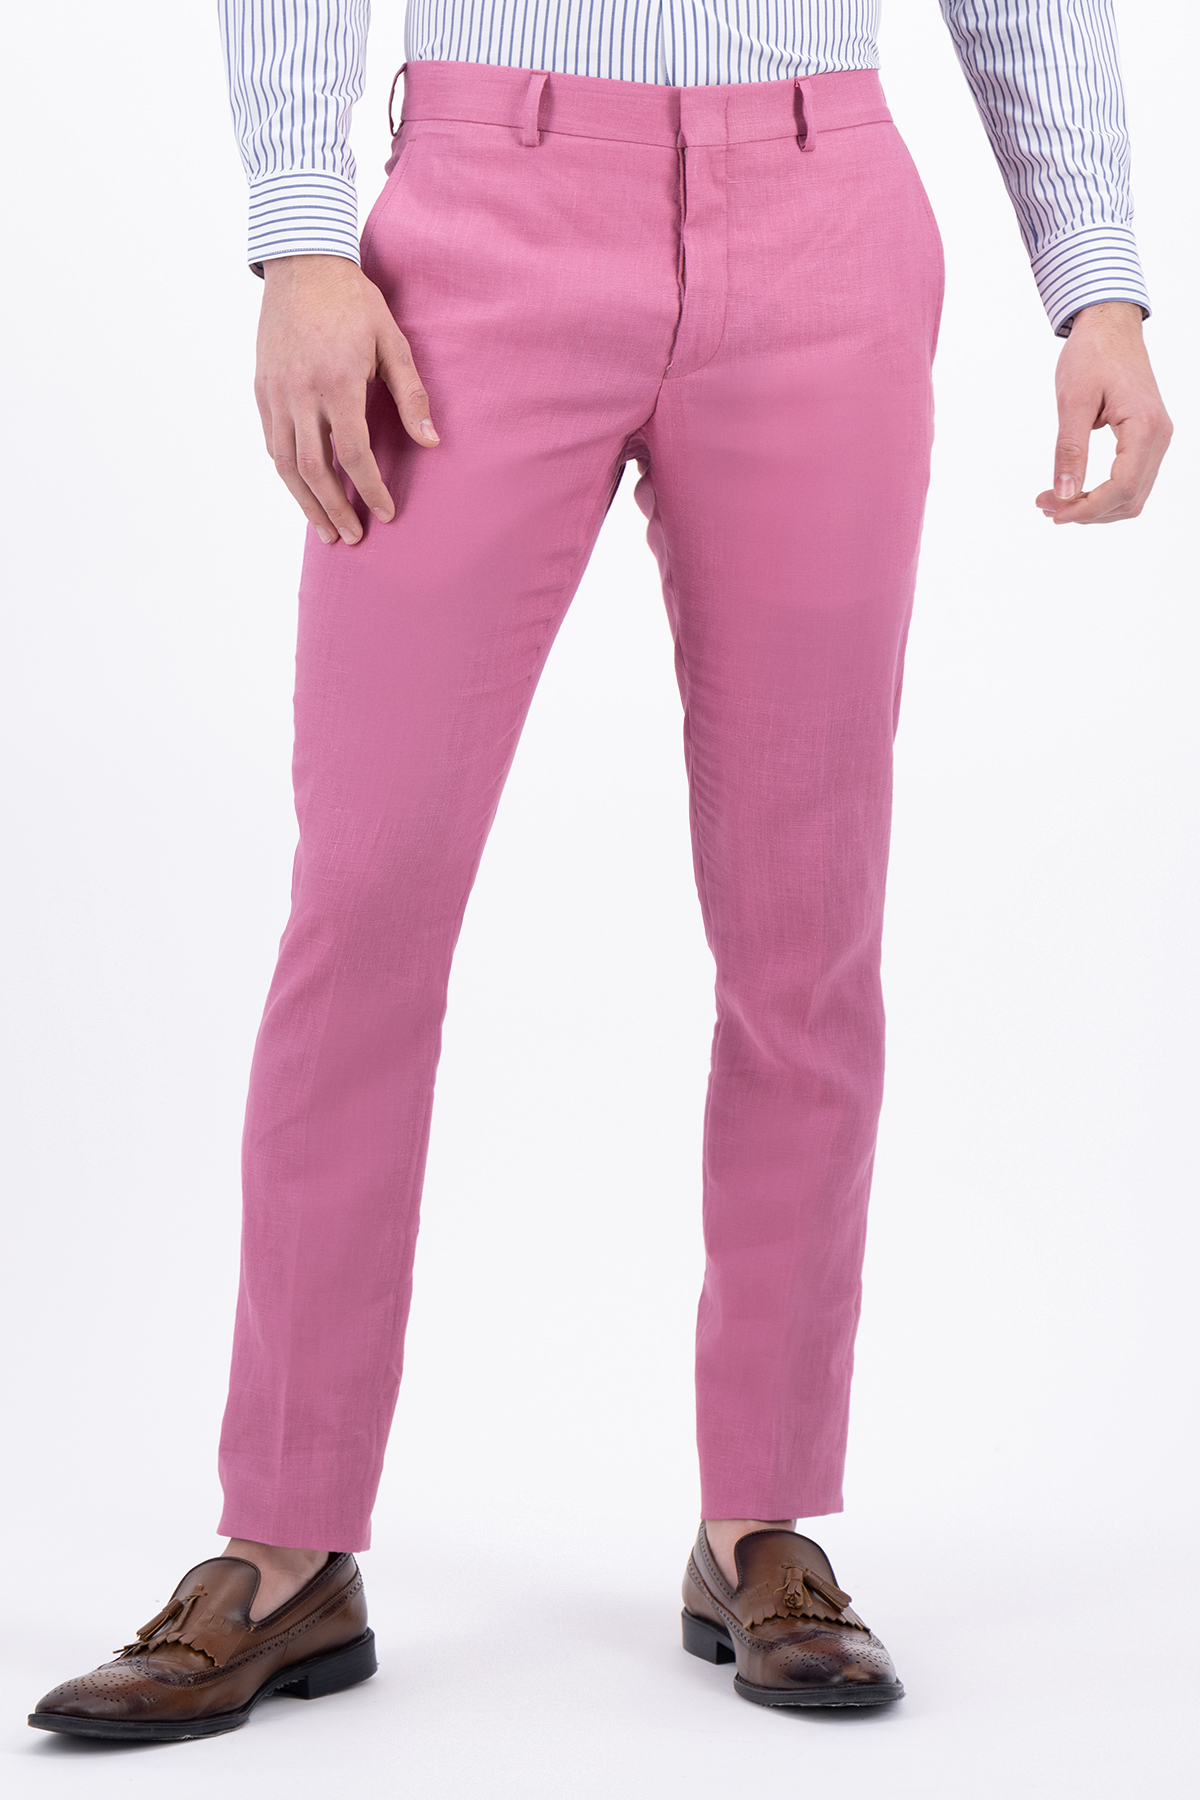 PANTALÓN SEPARATE ROSA OBSCURO SLIM FIT LMENTAL image number null